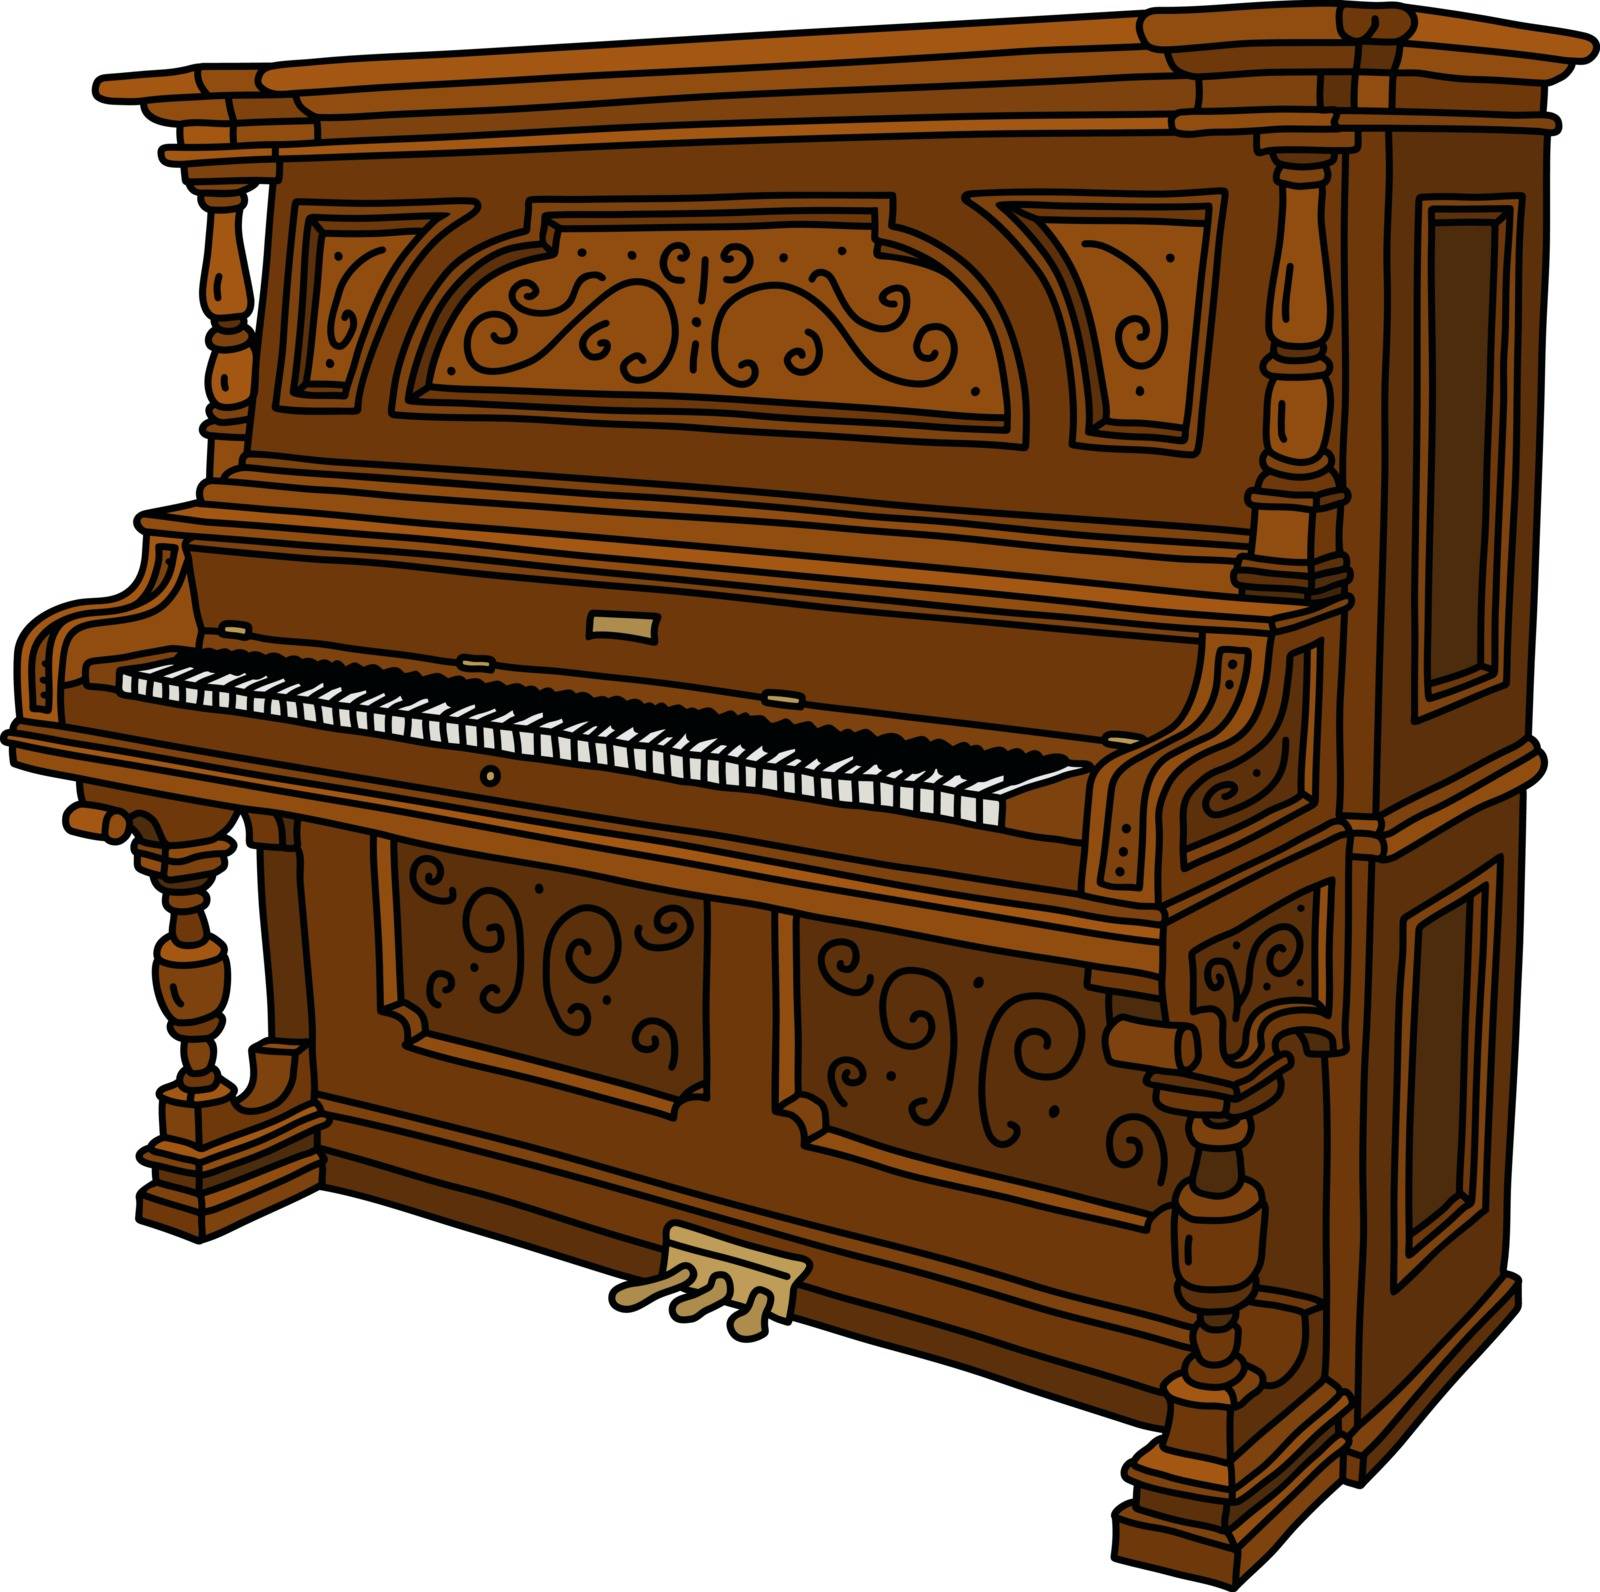 The vectorized hand drawing of a vintage wooden opened pianino